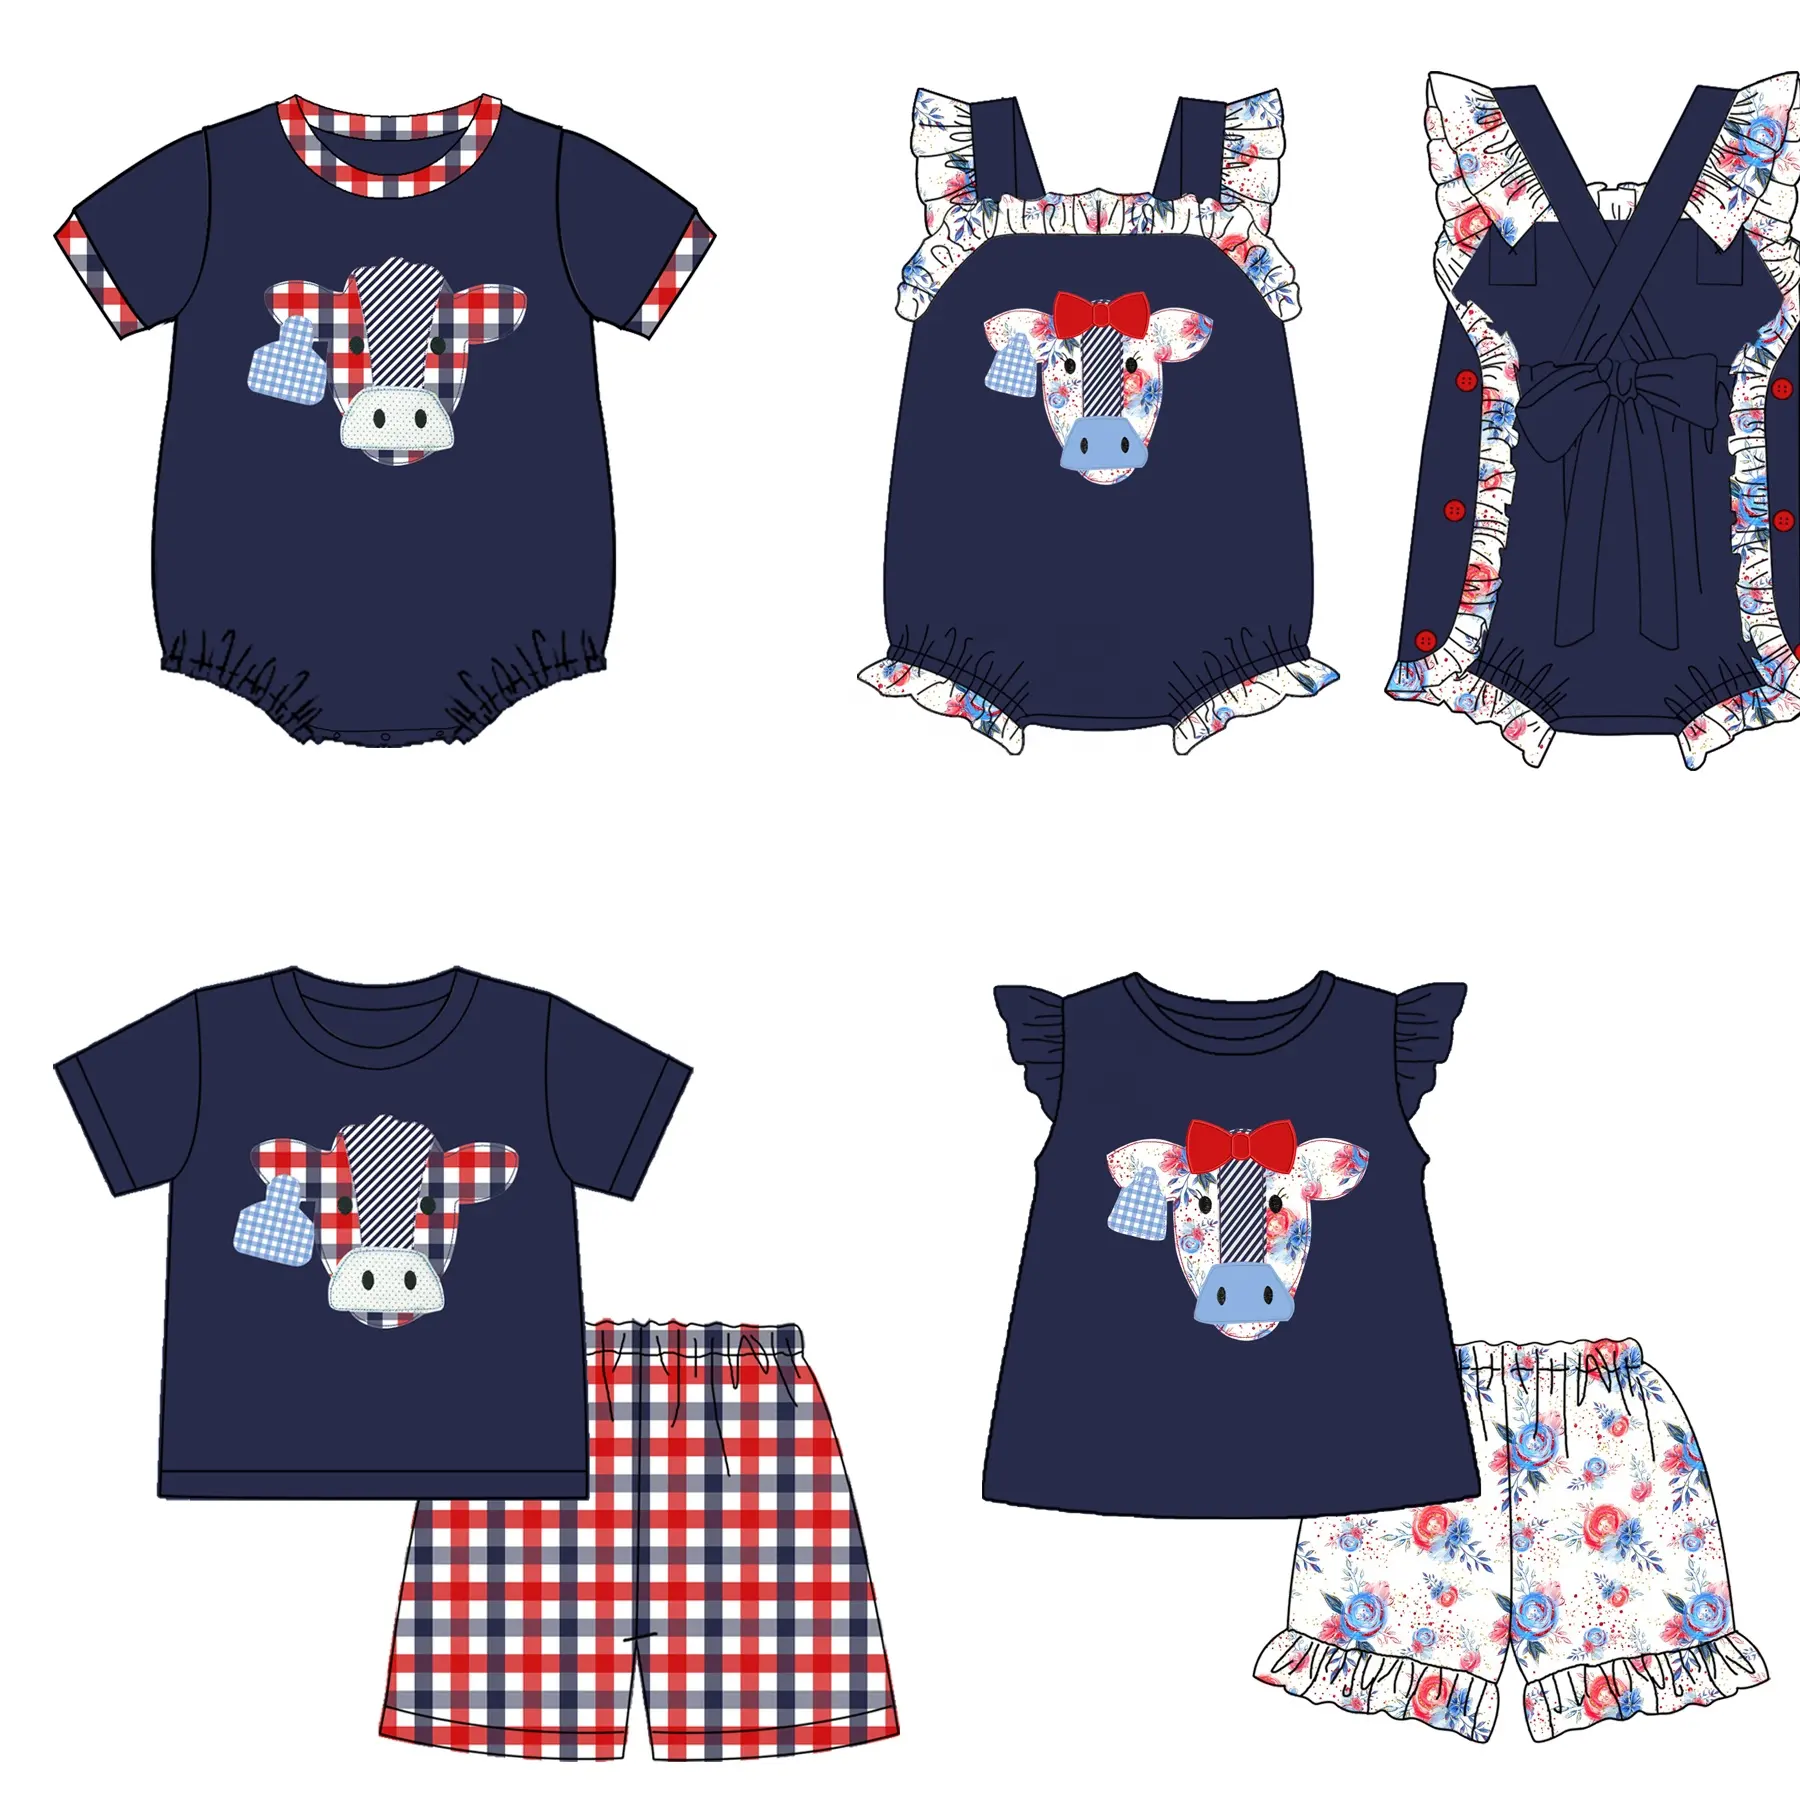 4th of July boy clothing kids boutique outfit wholesale summer boys 2 pieces clothing set